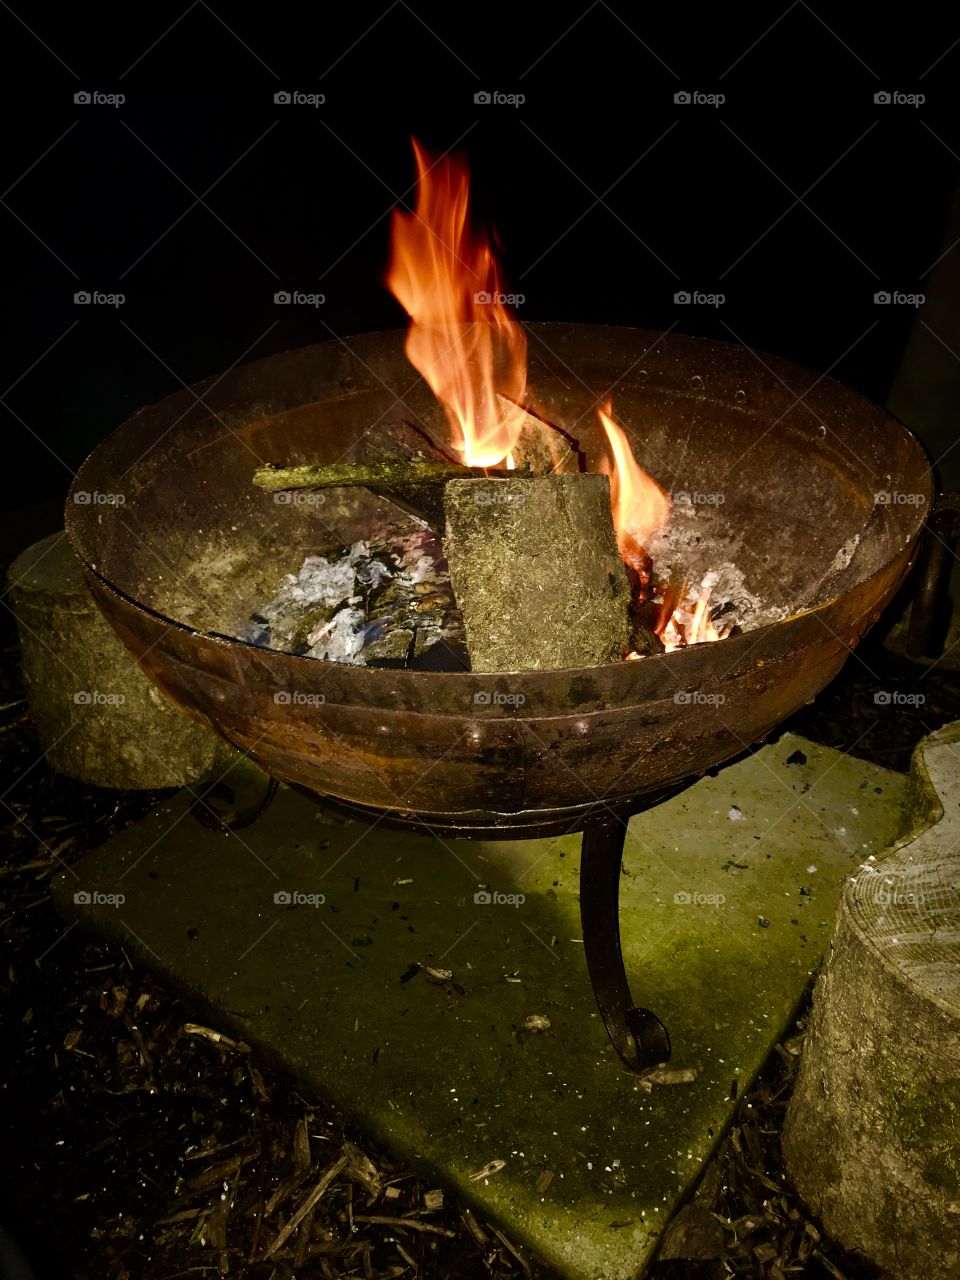 Fire pit barbecue camping flame woodland outdoors mindfulness calm tranquil 